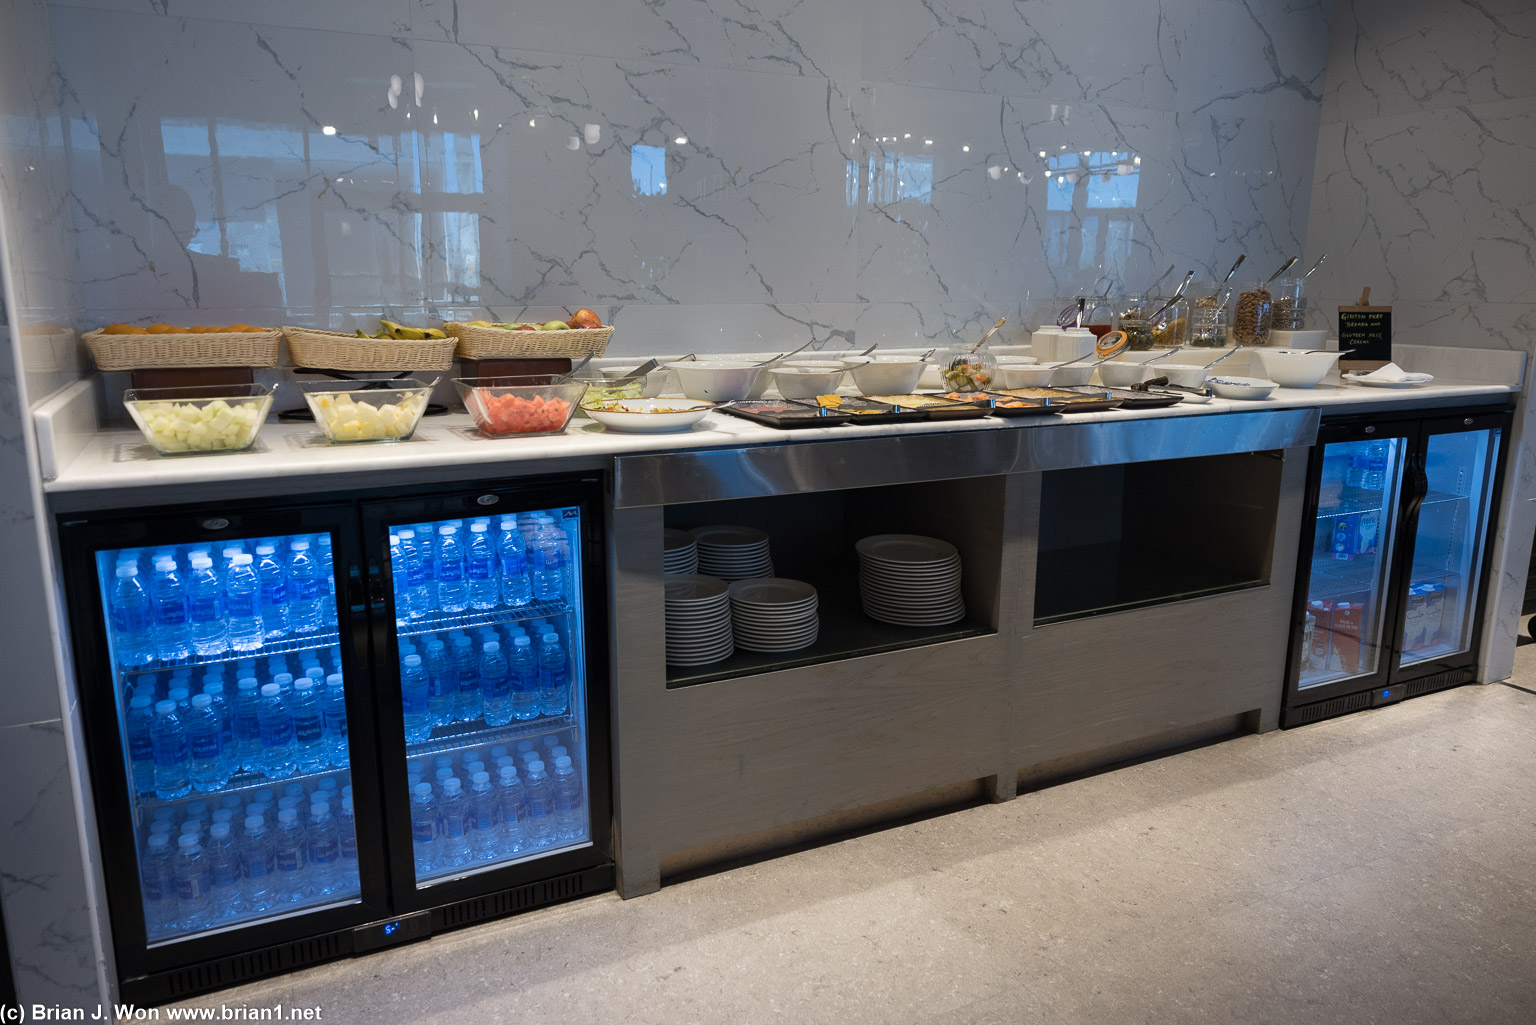 Part of the breakfast buffet at the Marriott Executive Apartments in Manama, Bahrain.